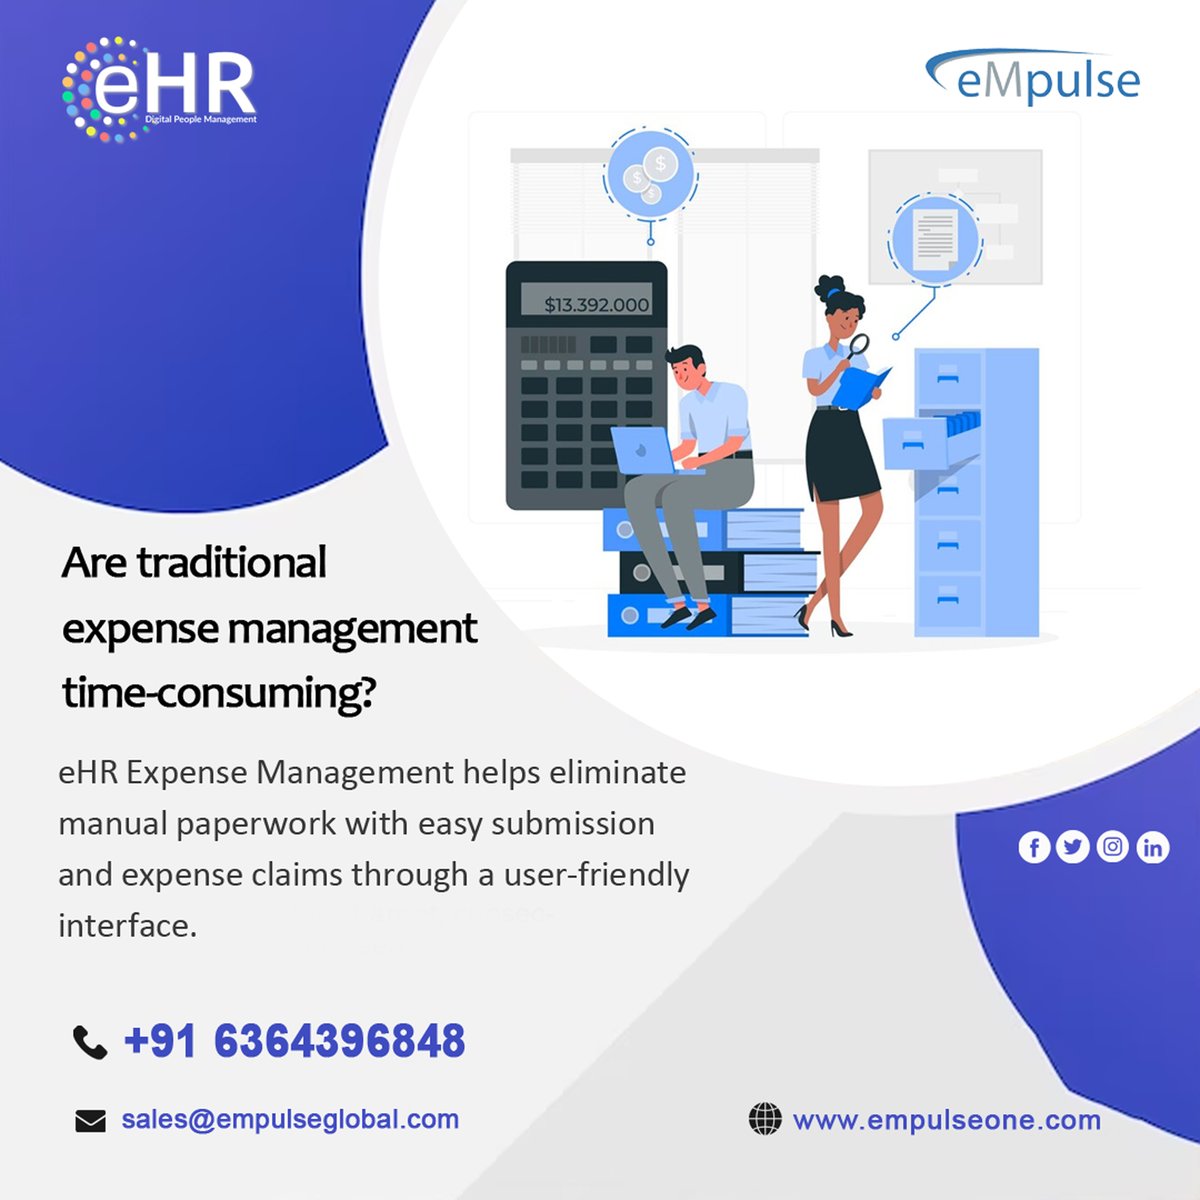 Are traditional expense management time-consuming?
eHR Expense Management helps eliminate manual paperwork with easy submission & expense claims through userfriendly interface.

Call:063643 96848
Site:empulsehrsolutions.com

#EHR #expensemanagement #Reimbursement #UserFriendly